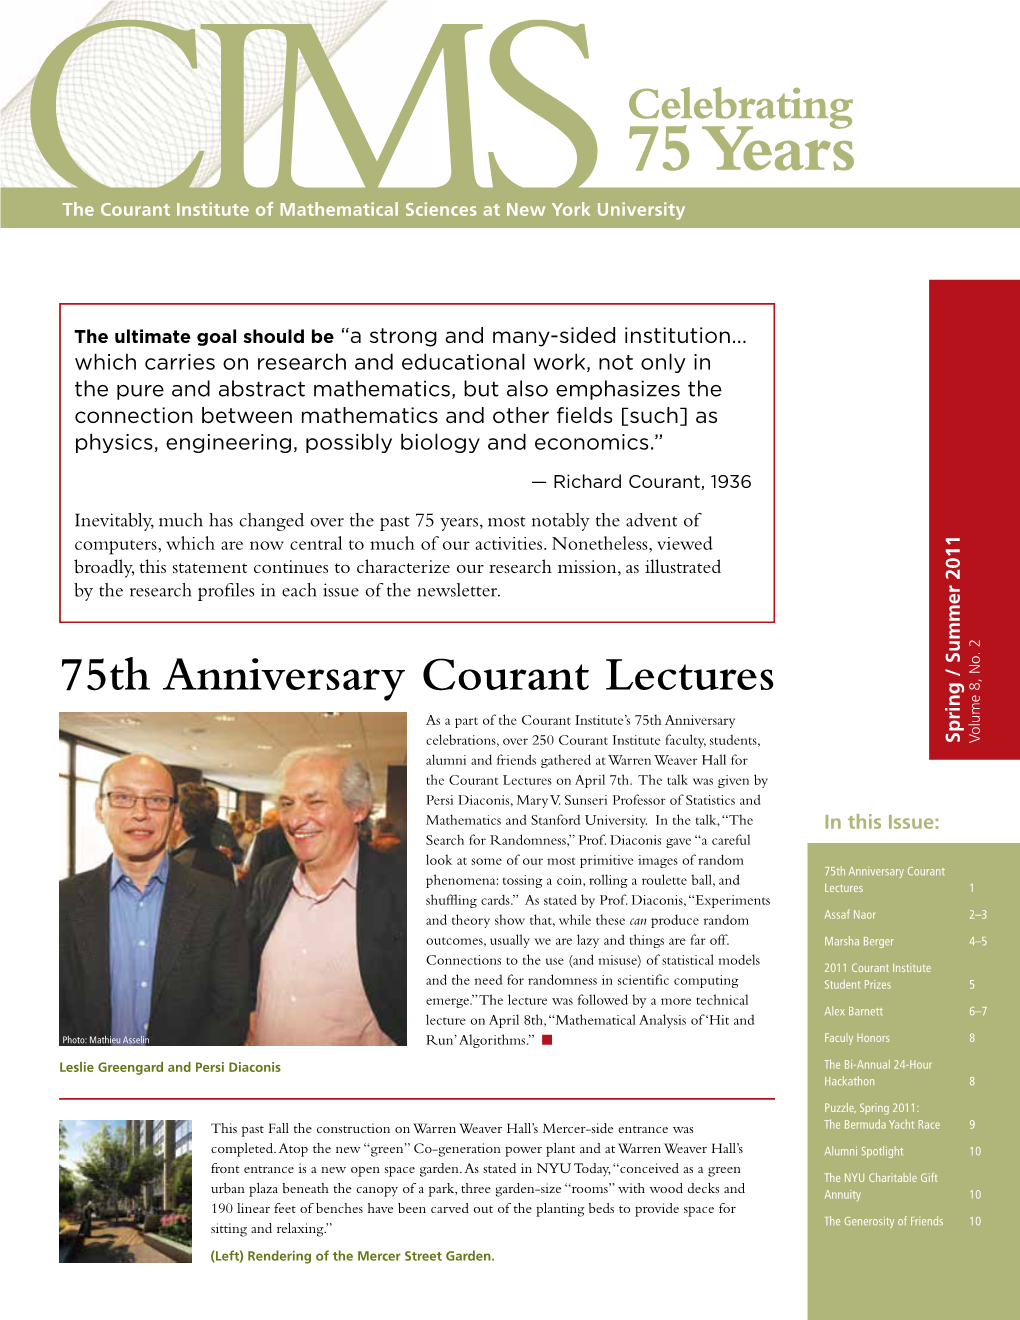 75 Years the Courant Institute of Mathematical Sciences at New York University